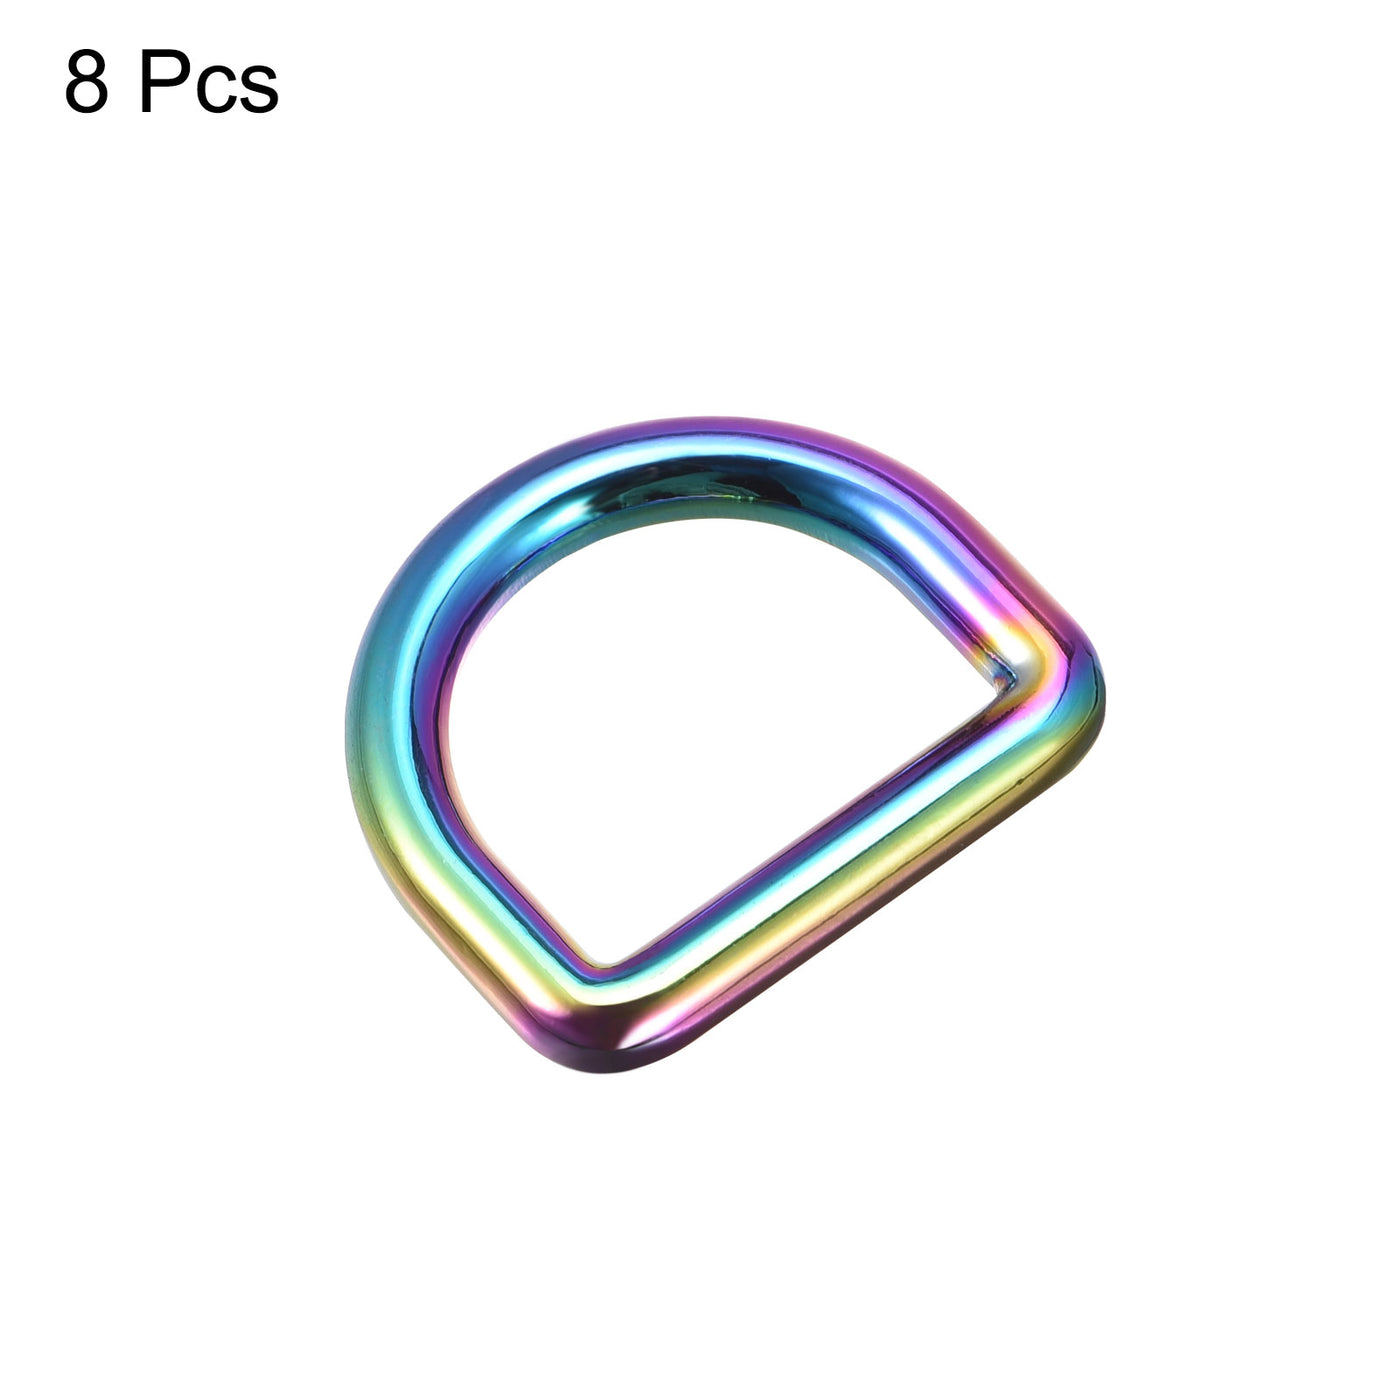 uxcell Uxcell Metal D Ring 0.98"(25mm) Zinc Alloy Buckle for Hardware Craft DIY Colorful 8pcs